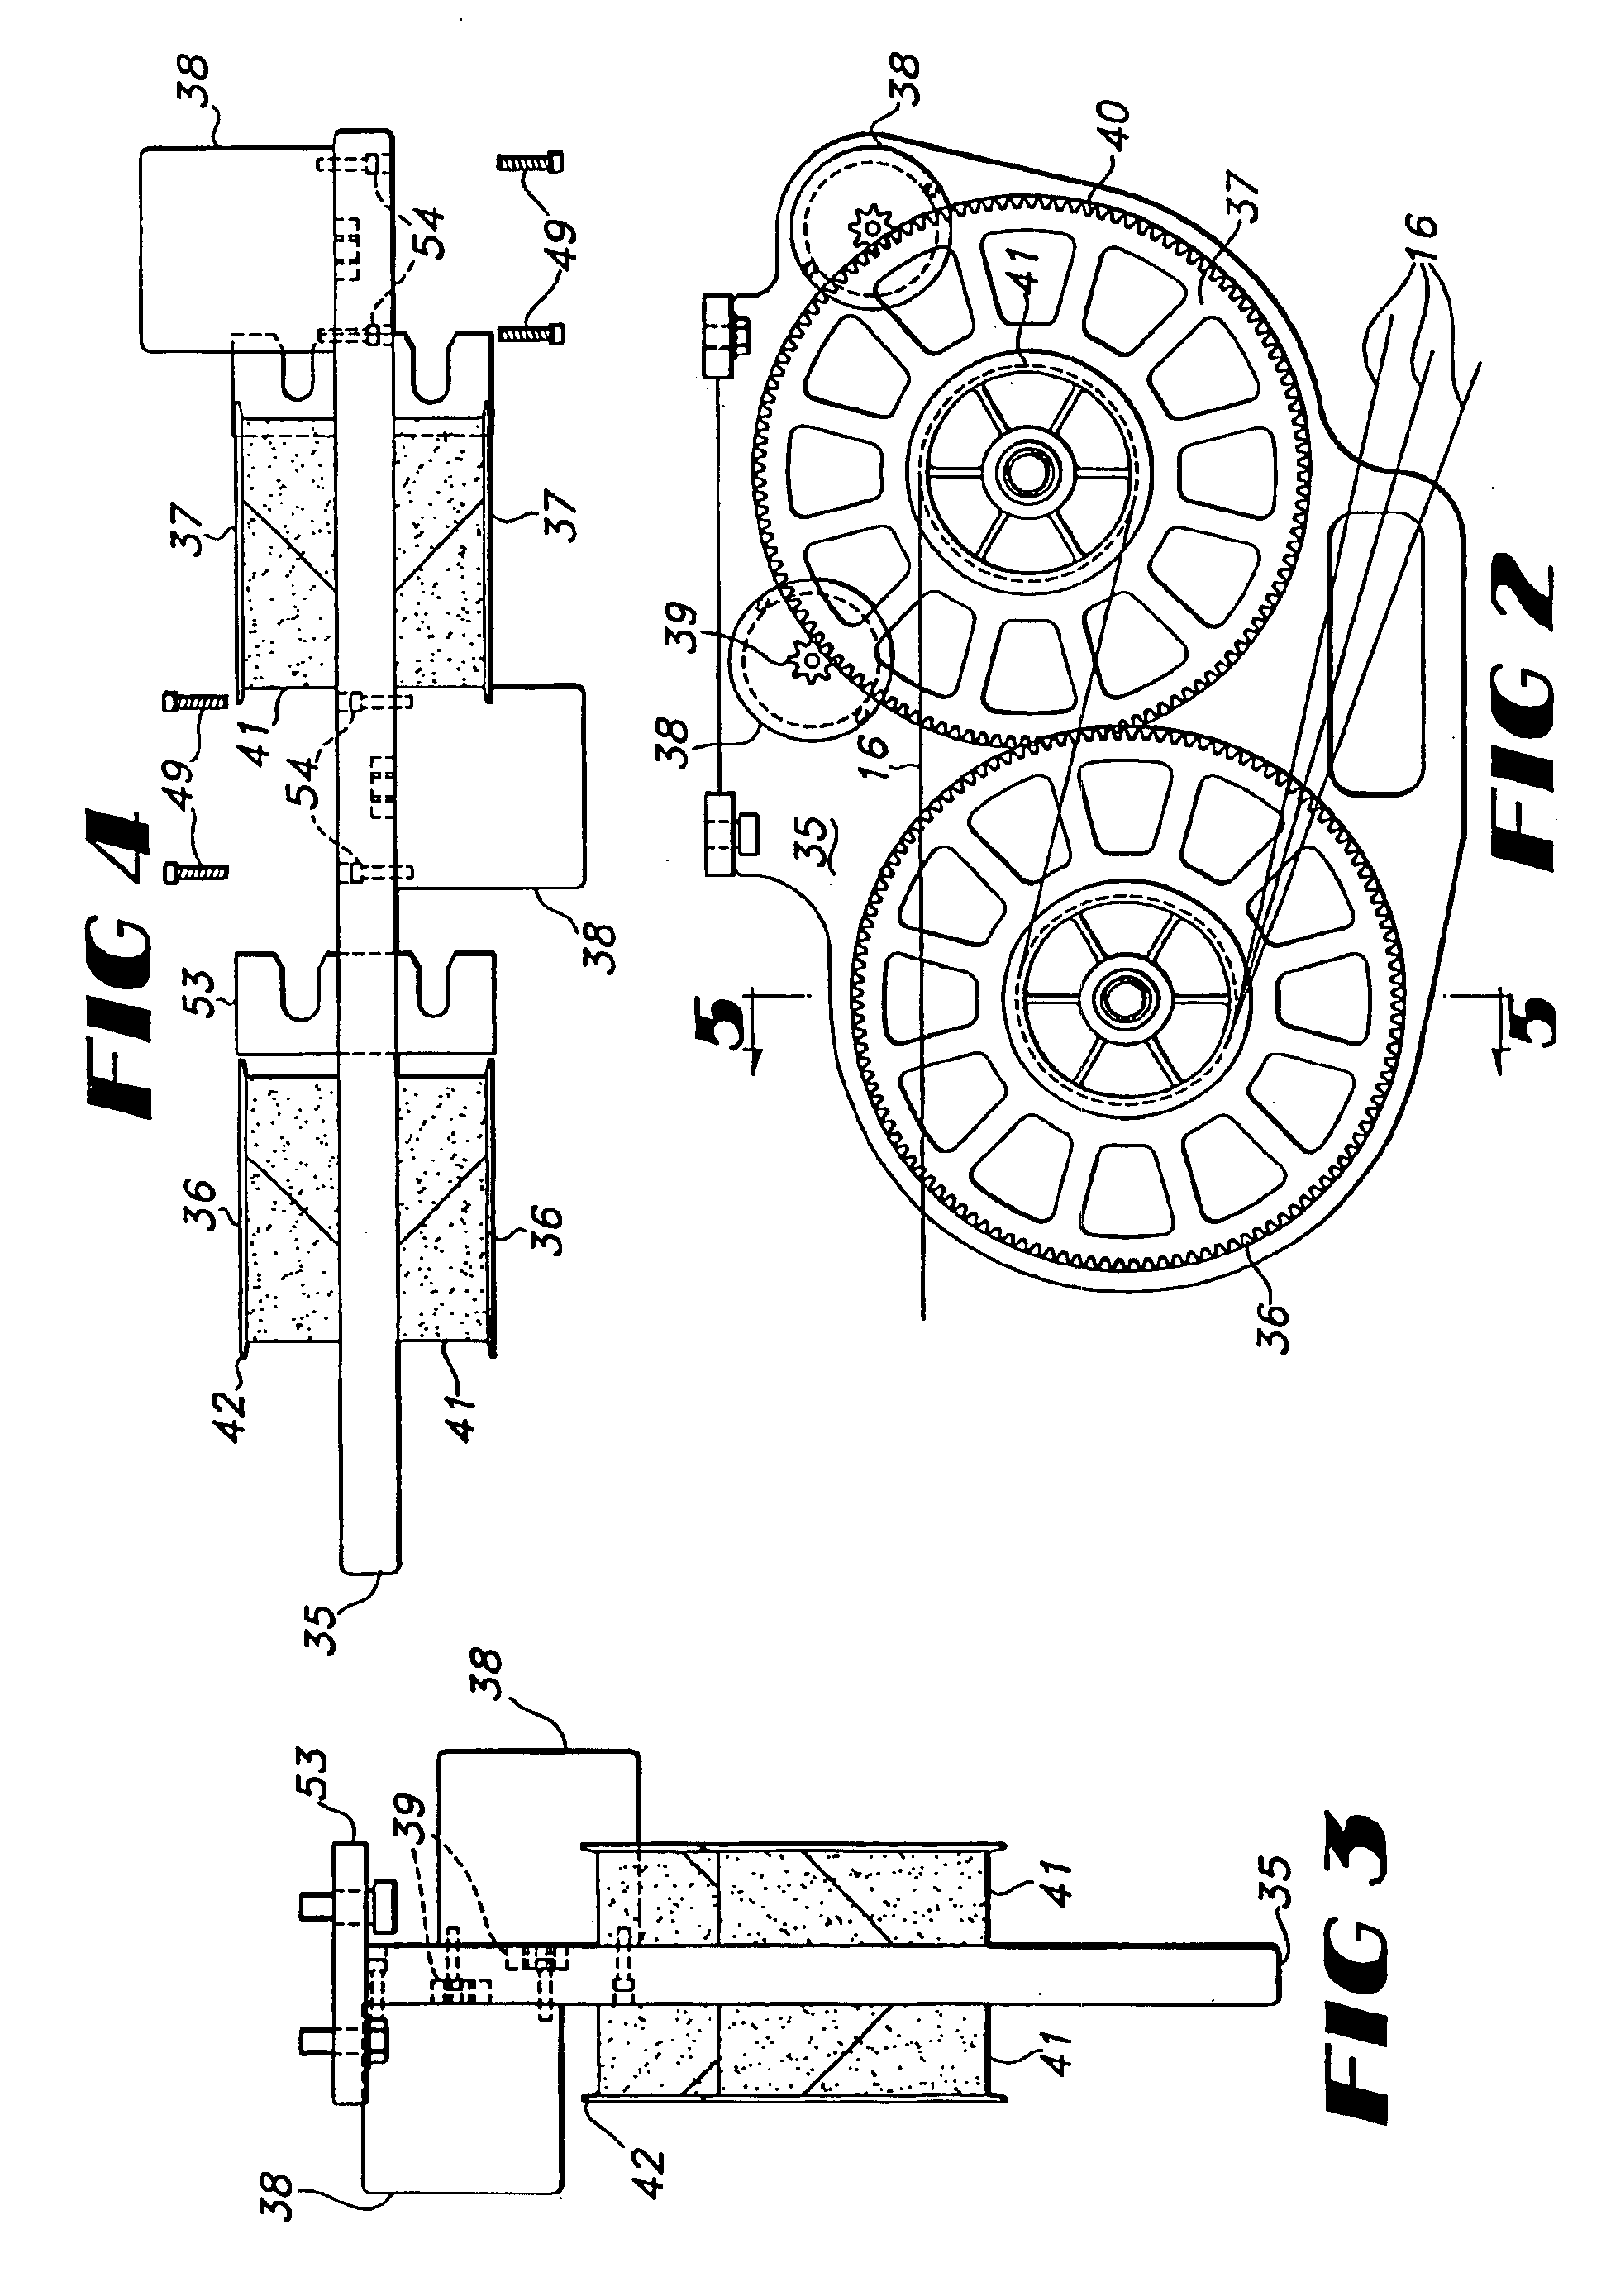 Servo motor driven scroll pattern attachments for tufting machine with computerized design system and methods of tufting